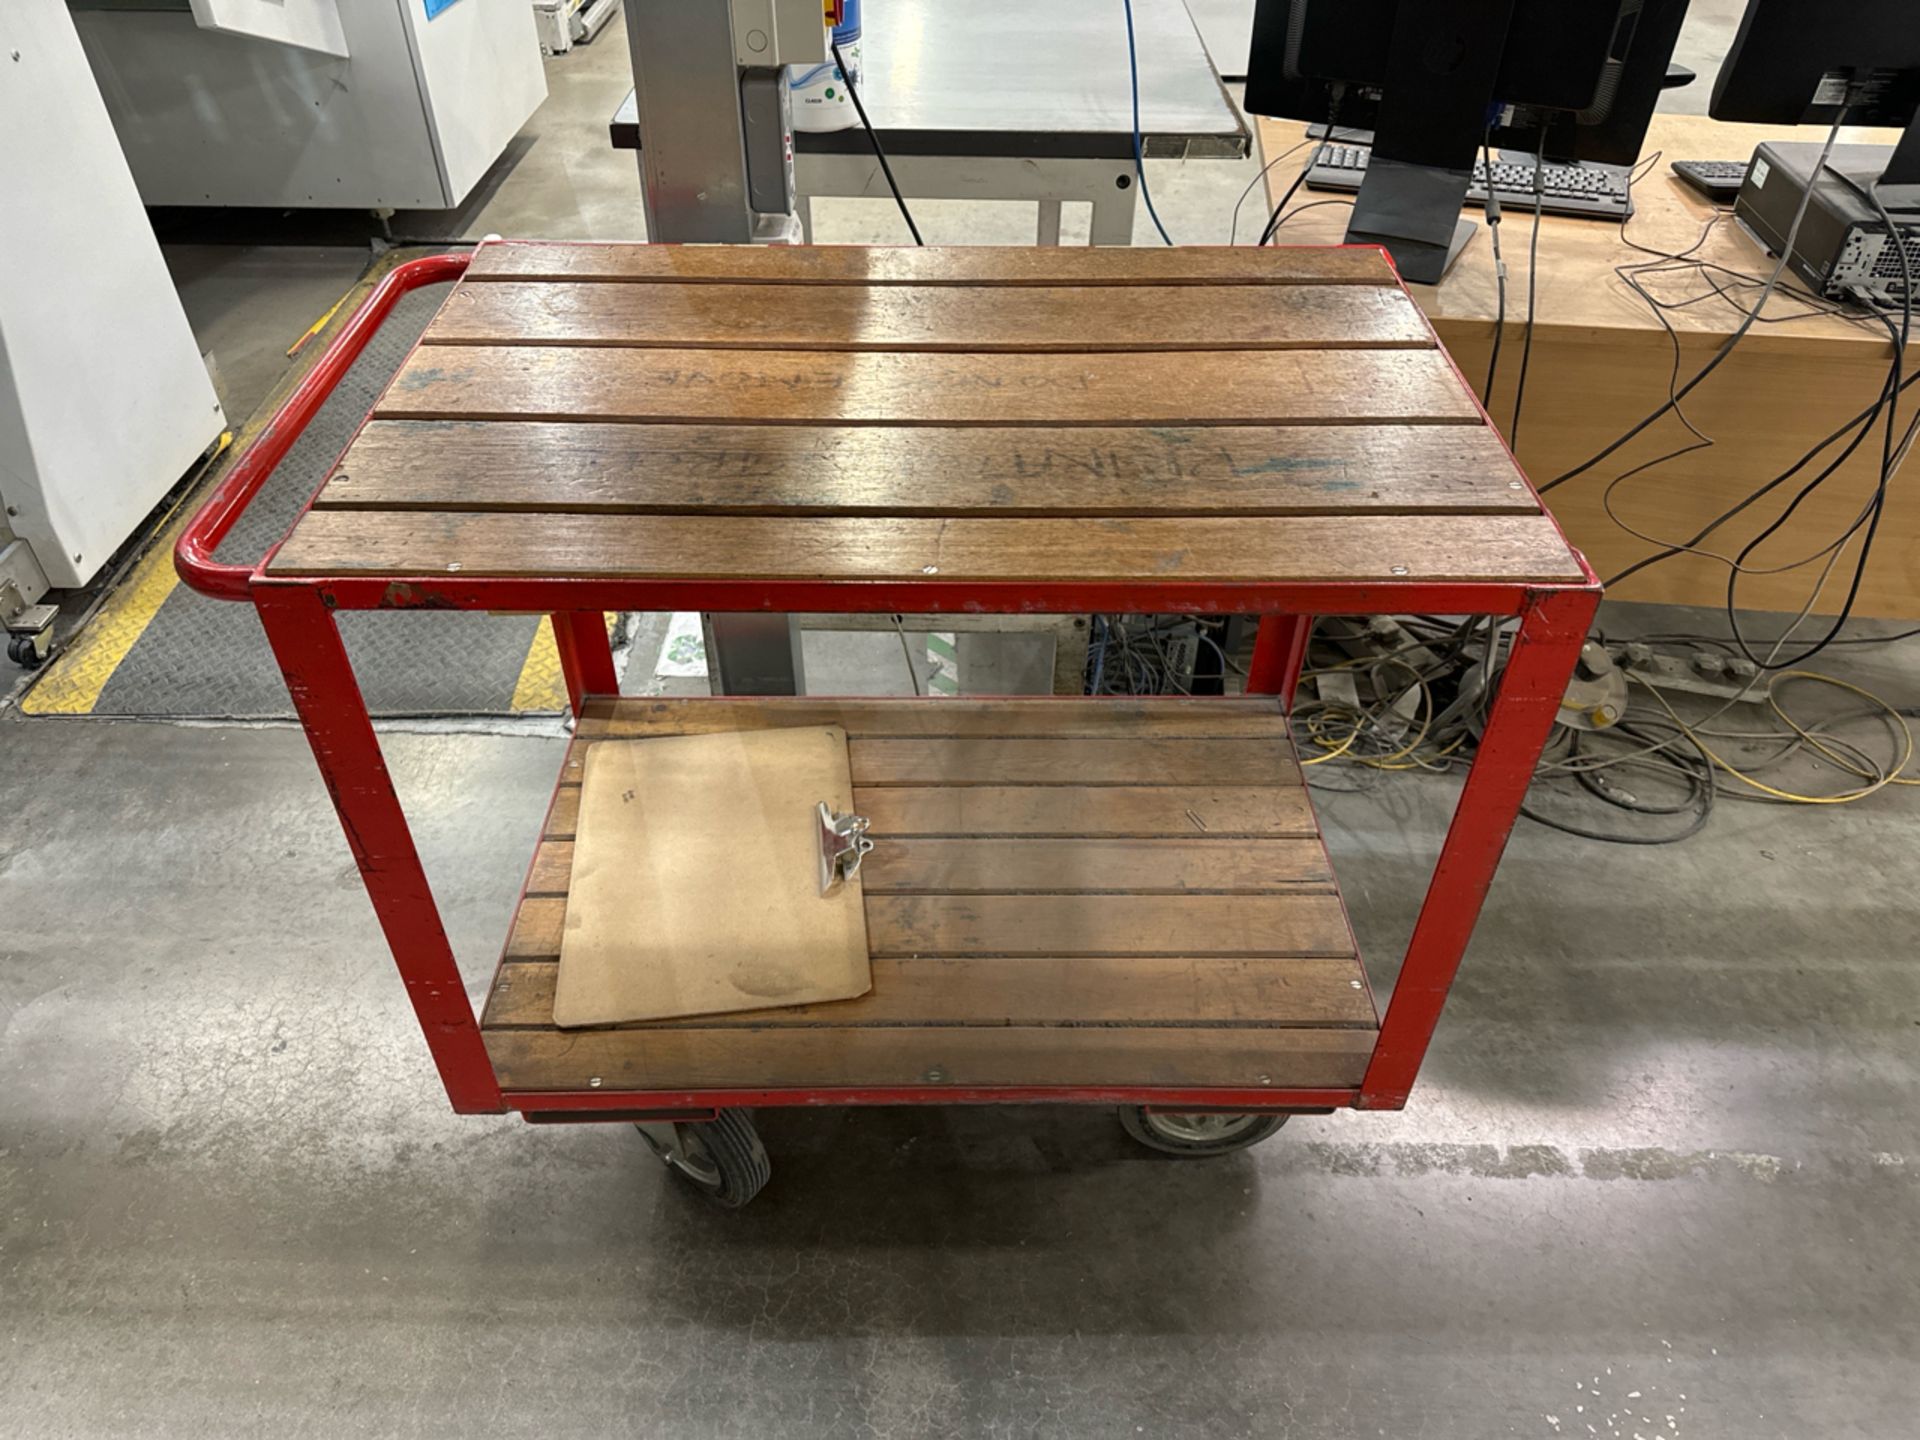 Red Metal Trolley With Wood Slats - Image 2 of 3